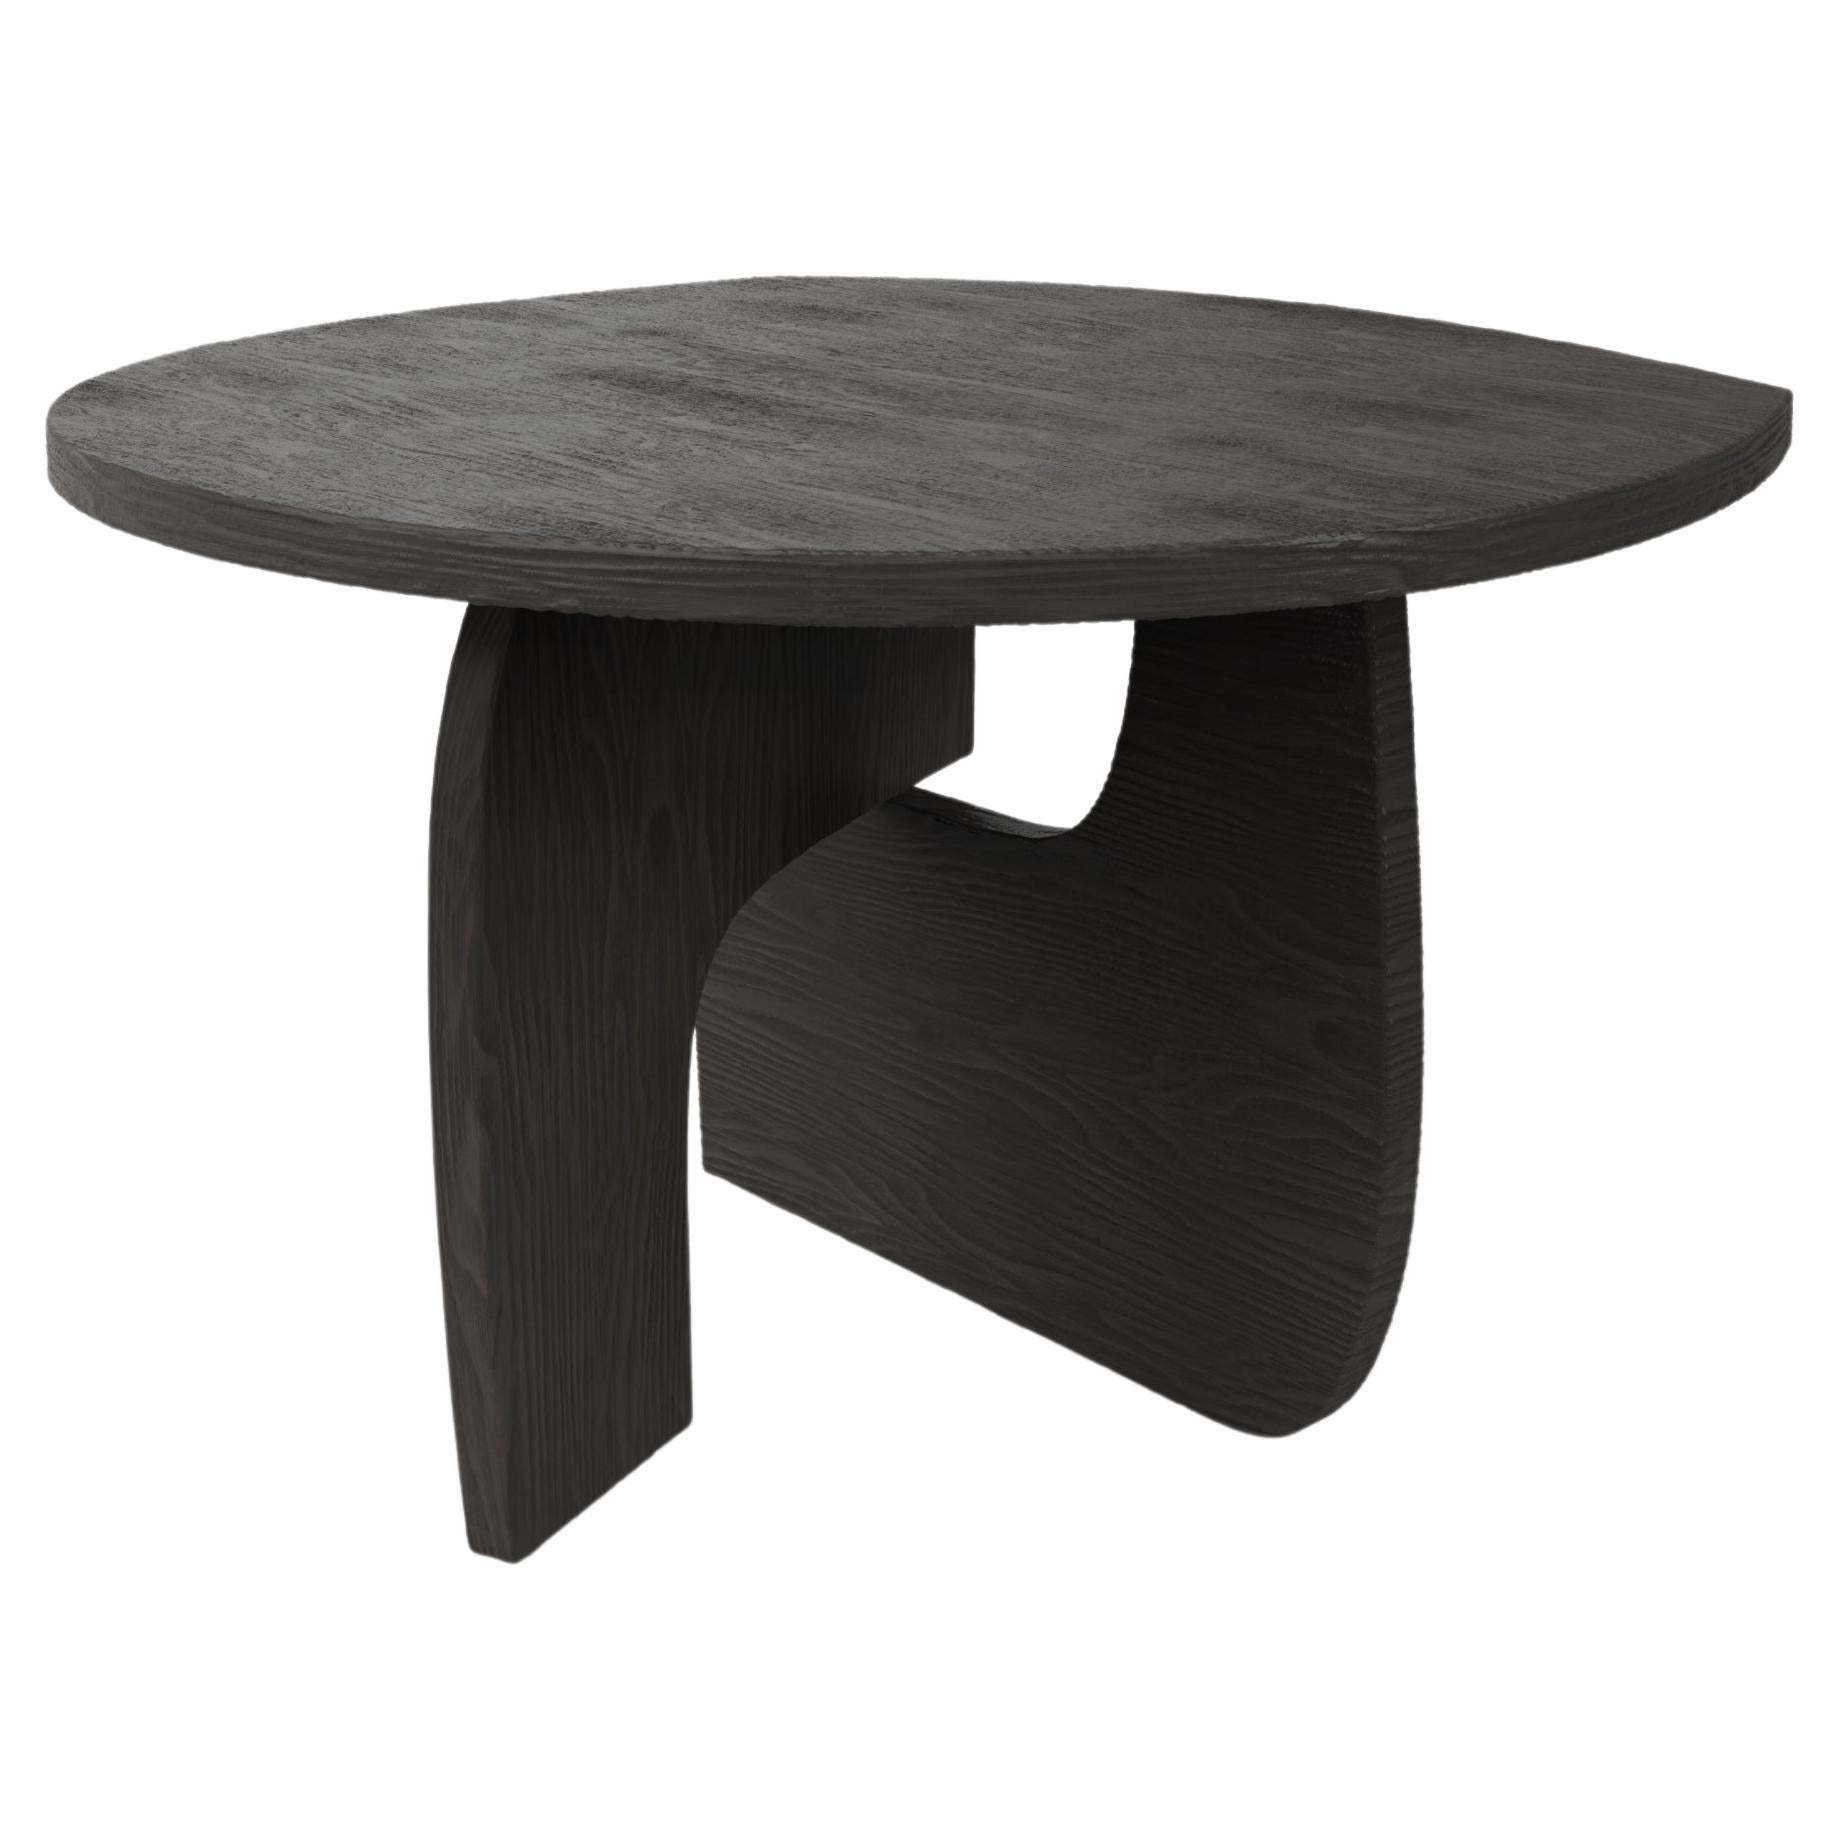 Contemporary Limited Edition Signed Charred Table, Reef V2 by Edizione Limitata For Sale